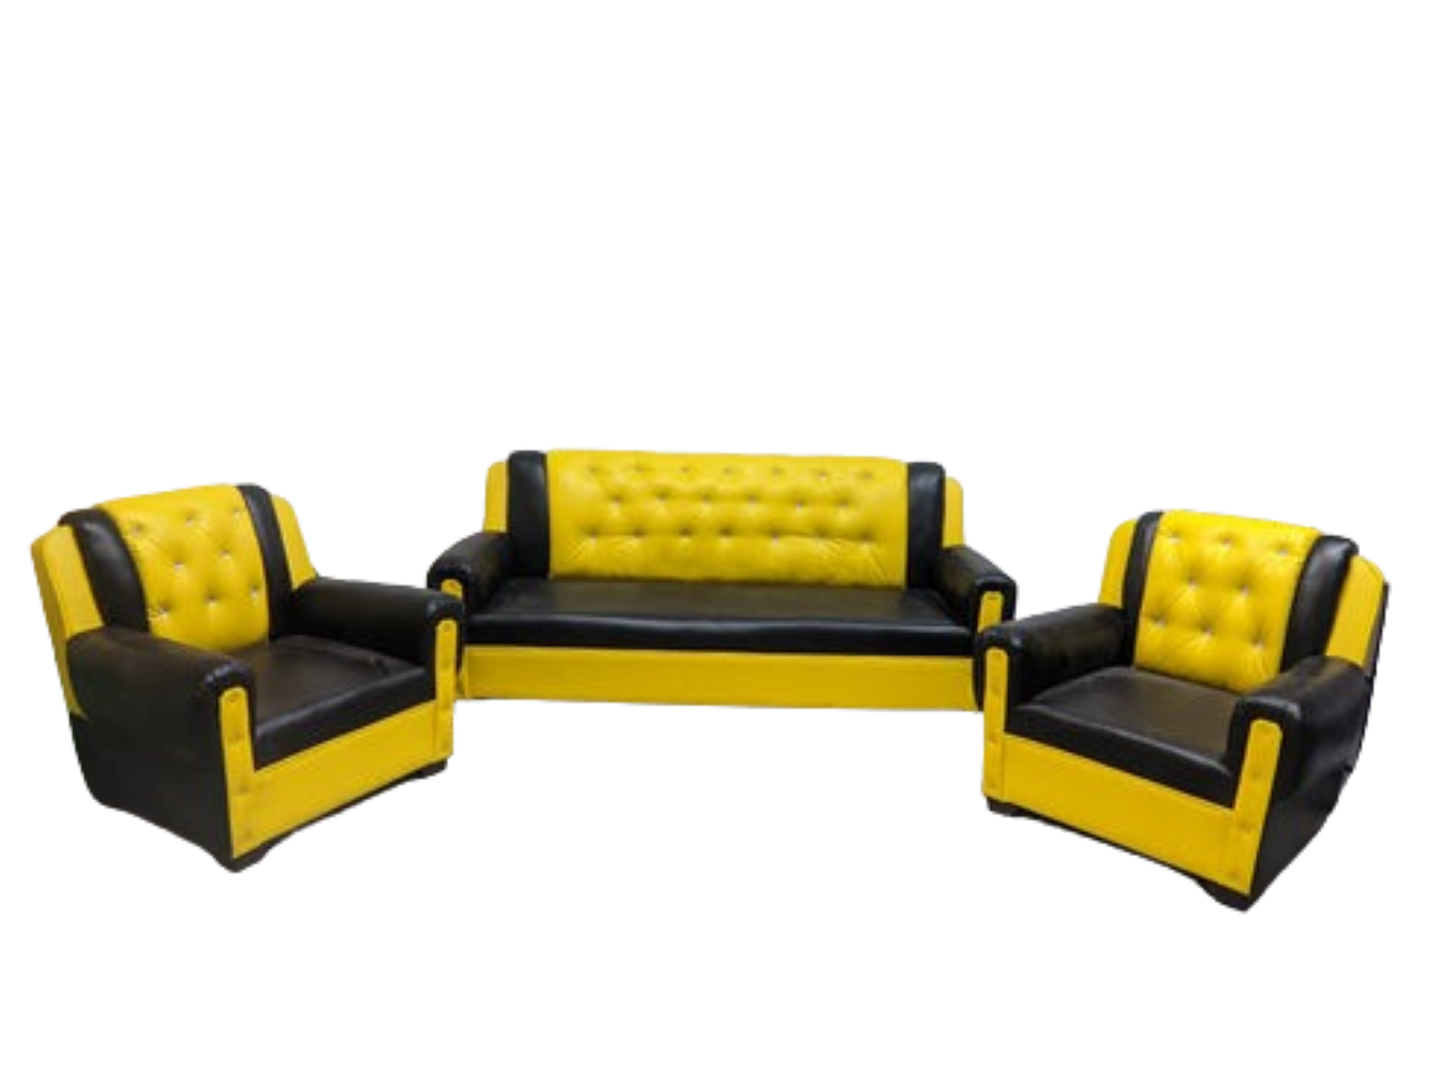 Bowzar Wooden Sofa 5 Seater with Good Quality Foam Yellow Black